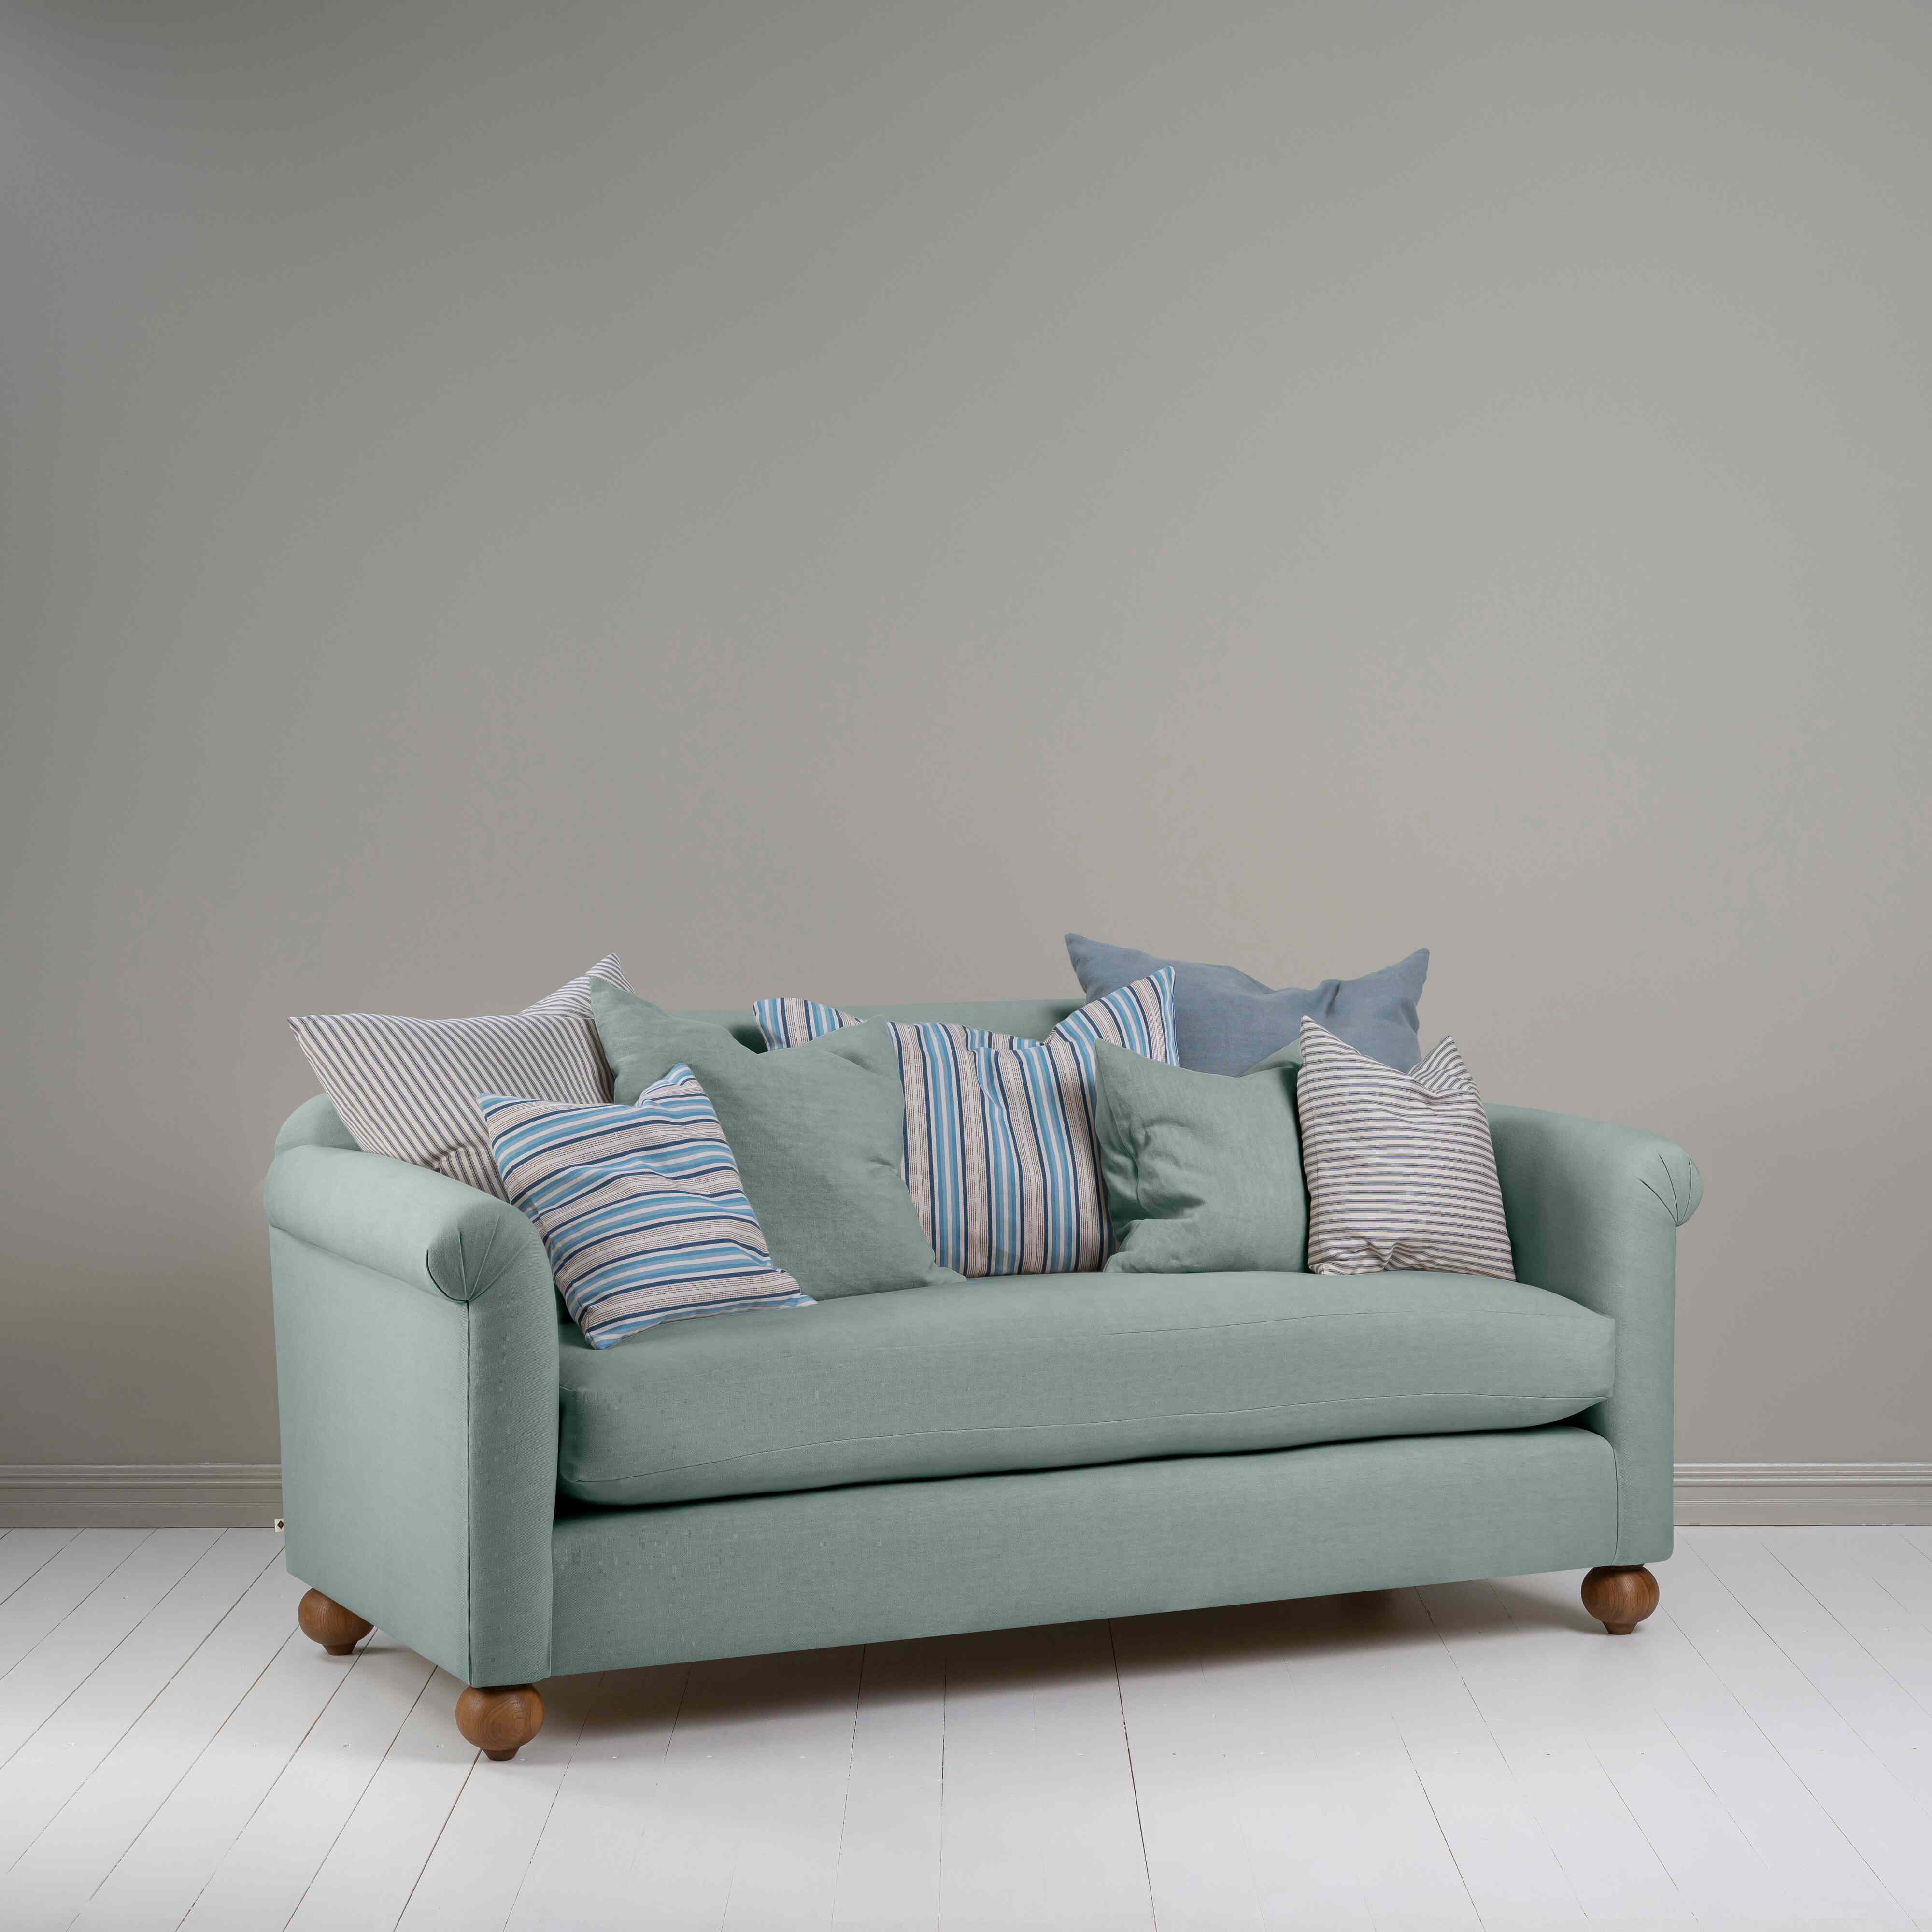  Dolittle 3 Seater Sofa in Laidback Linen Mineral 